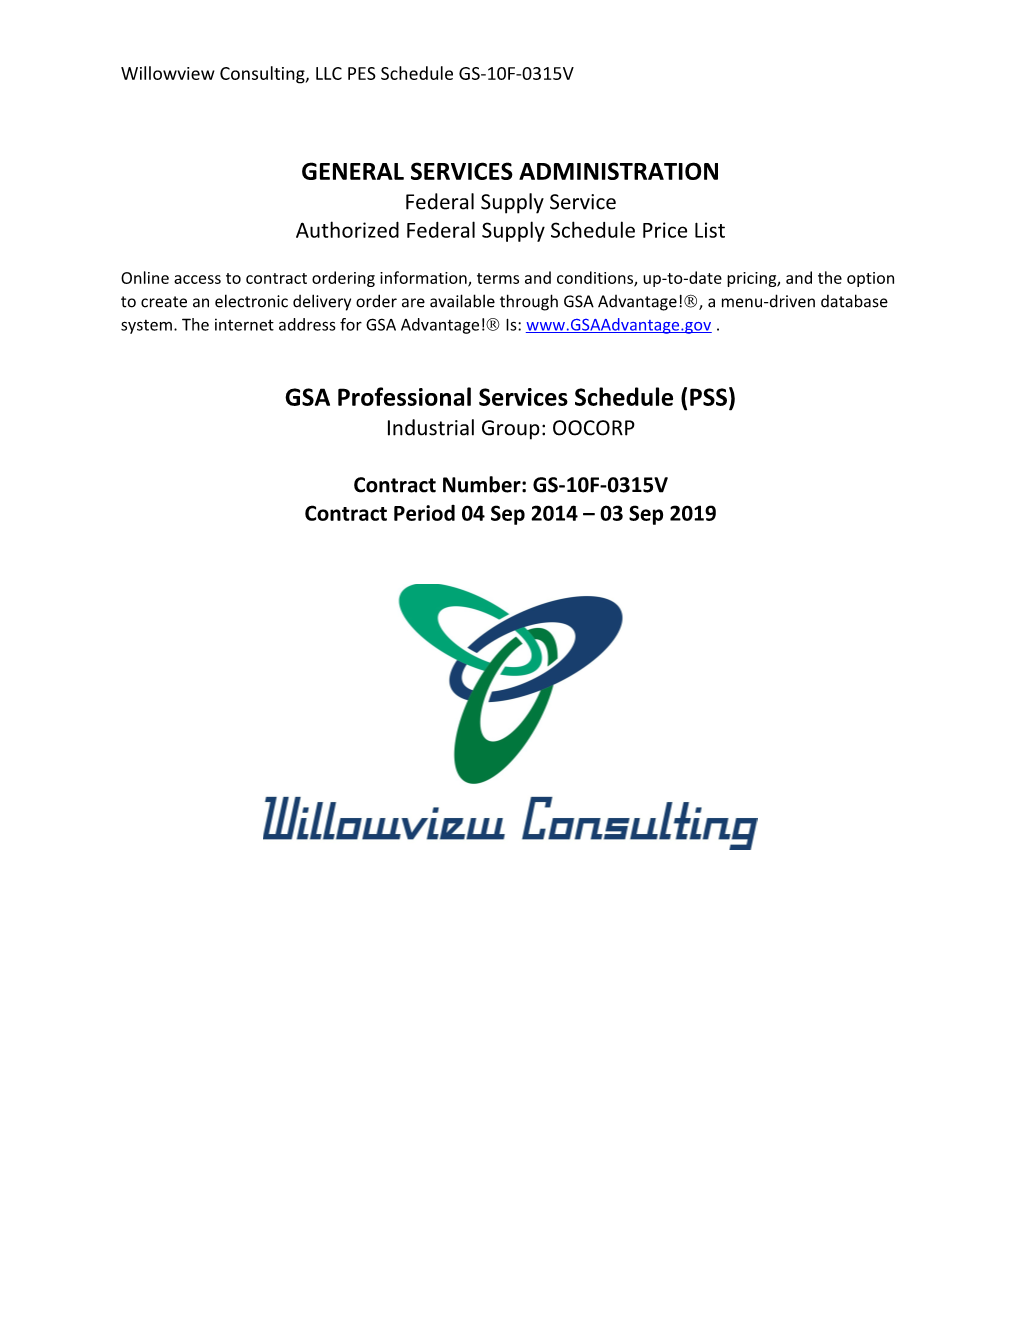 Willowview Consulting, LLC Professional Engineering Services